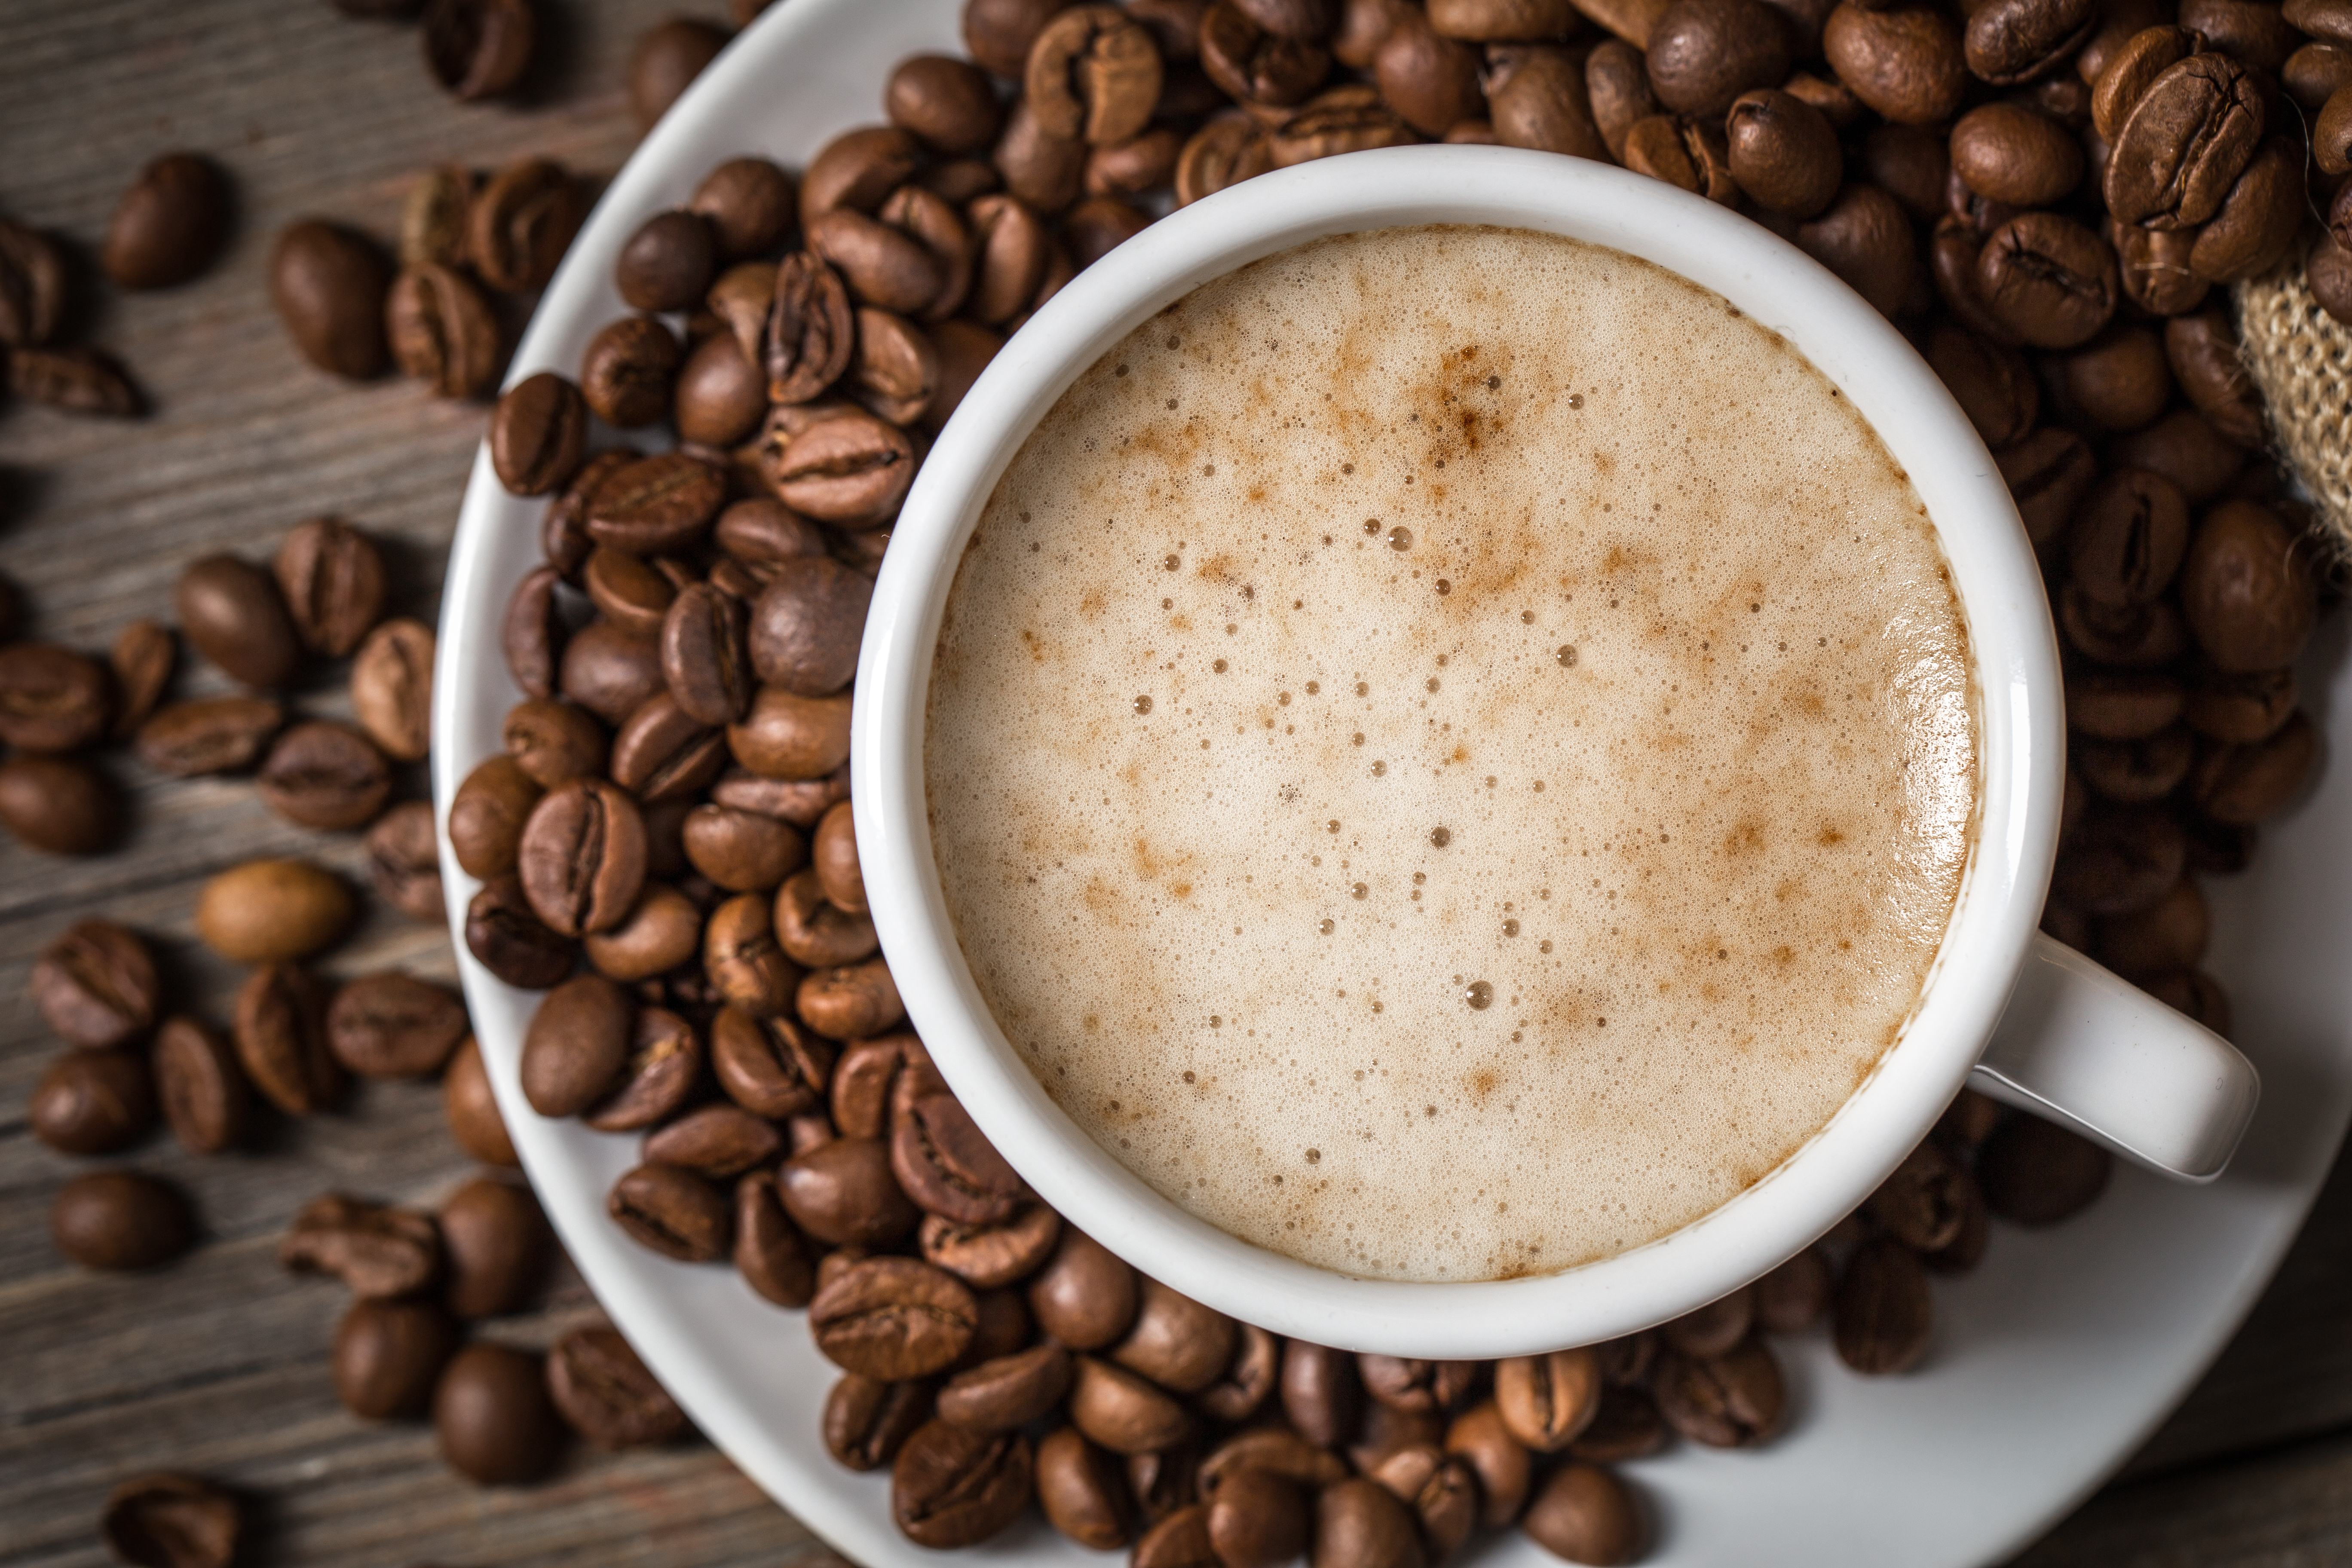 Coffee Compounds that Could Help Prevent Type 2 Diabetes Identified